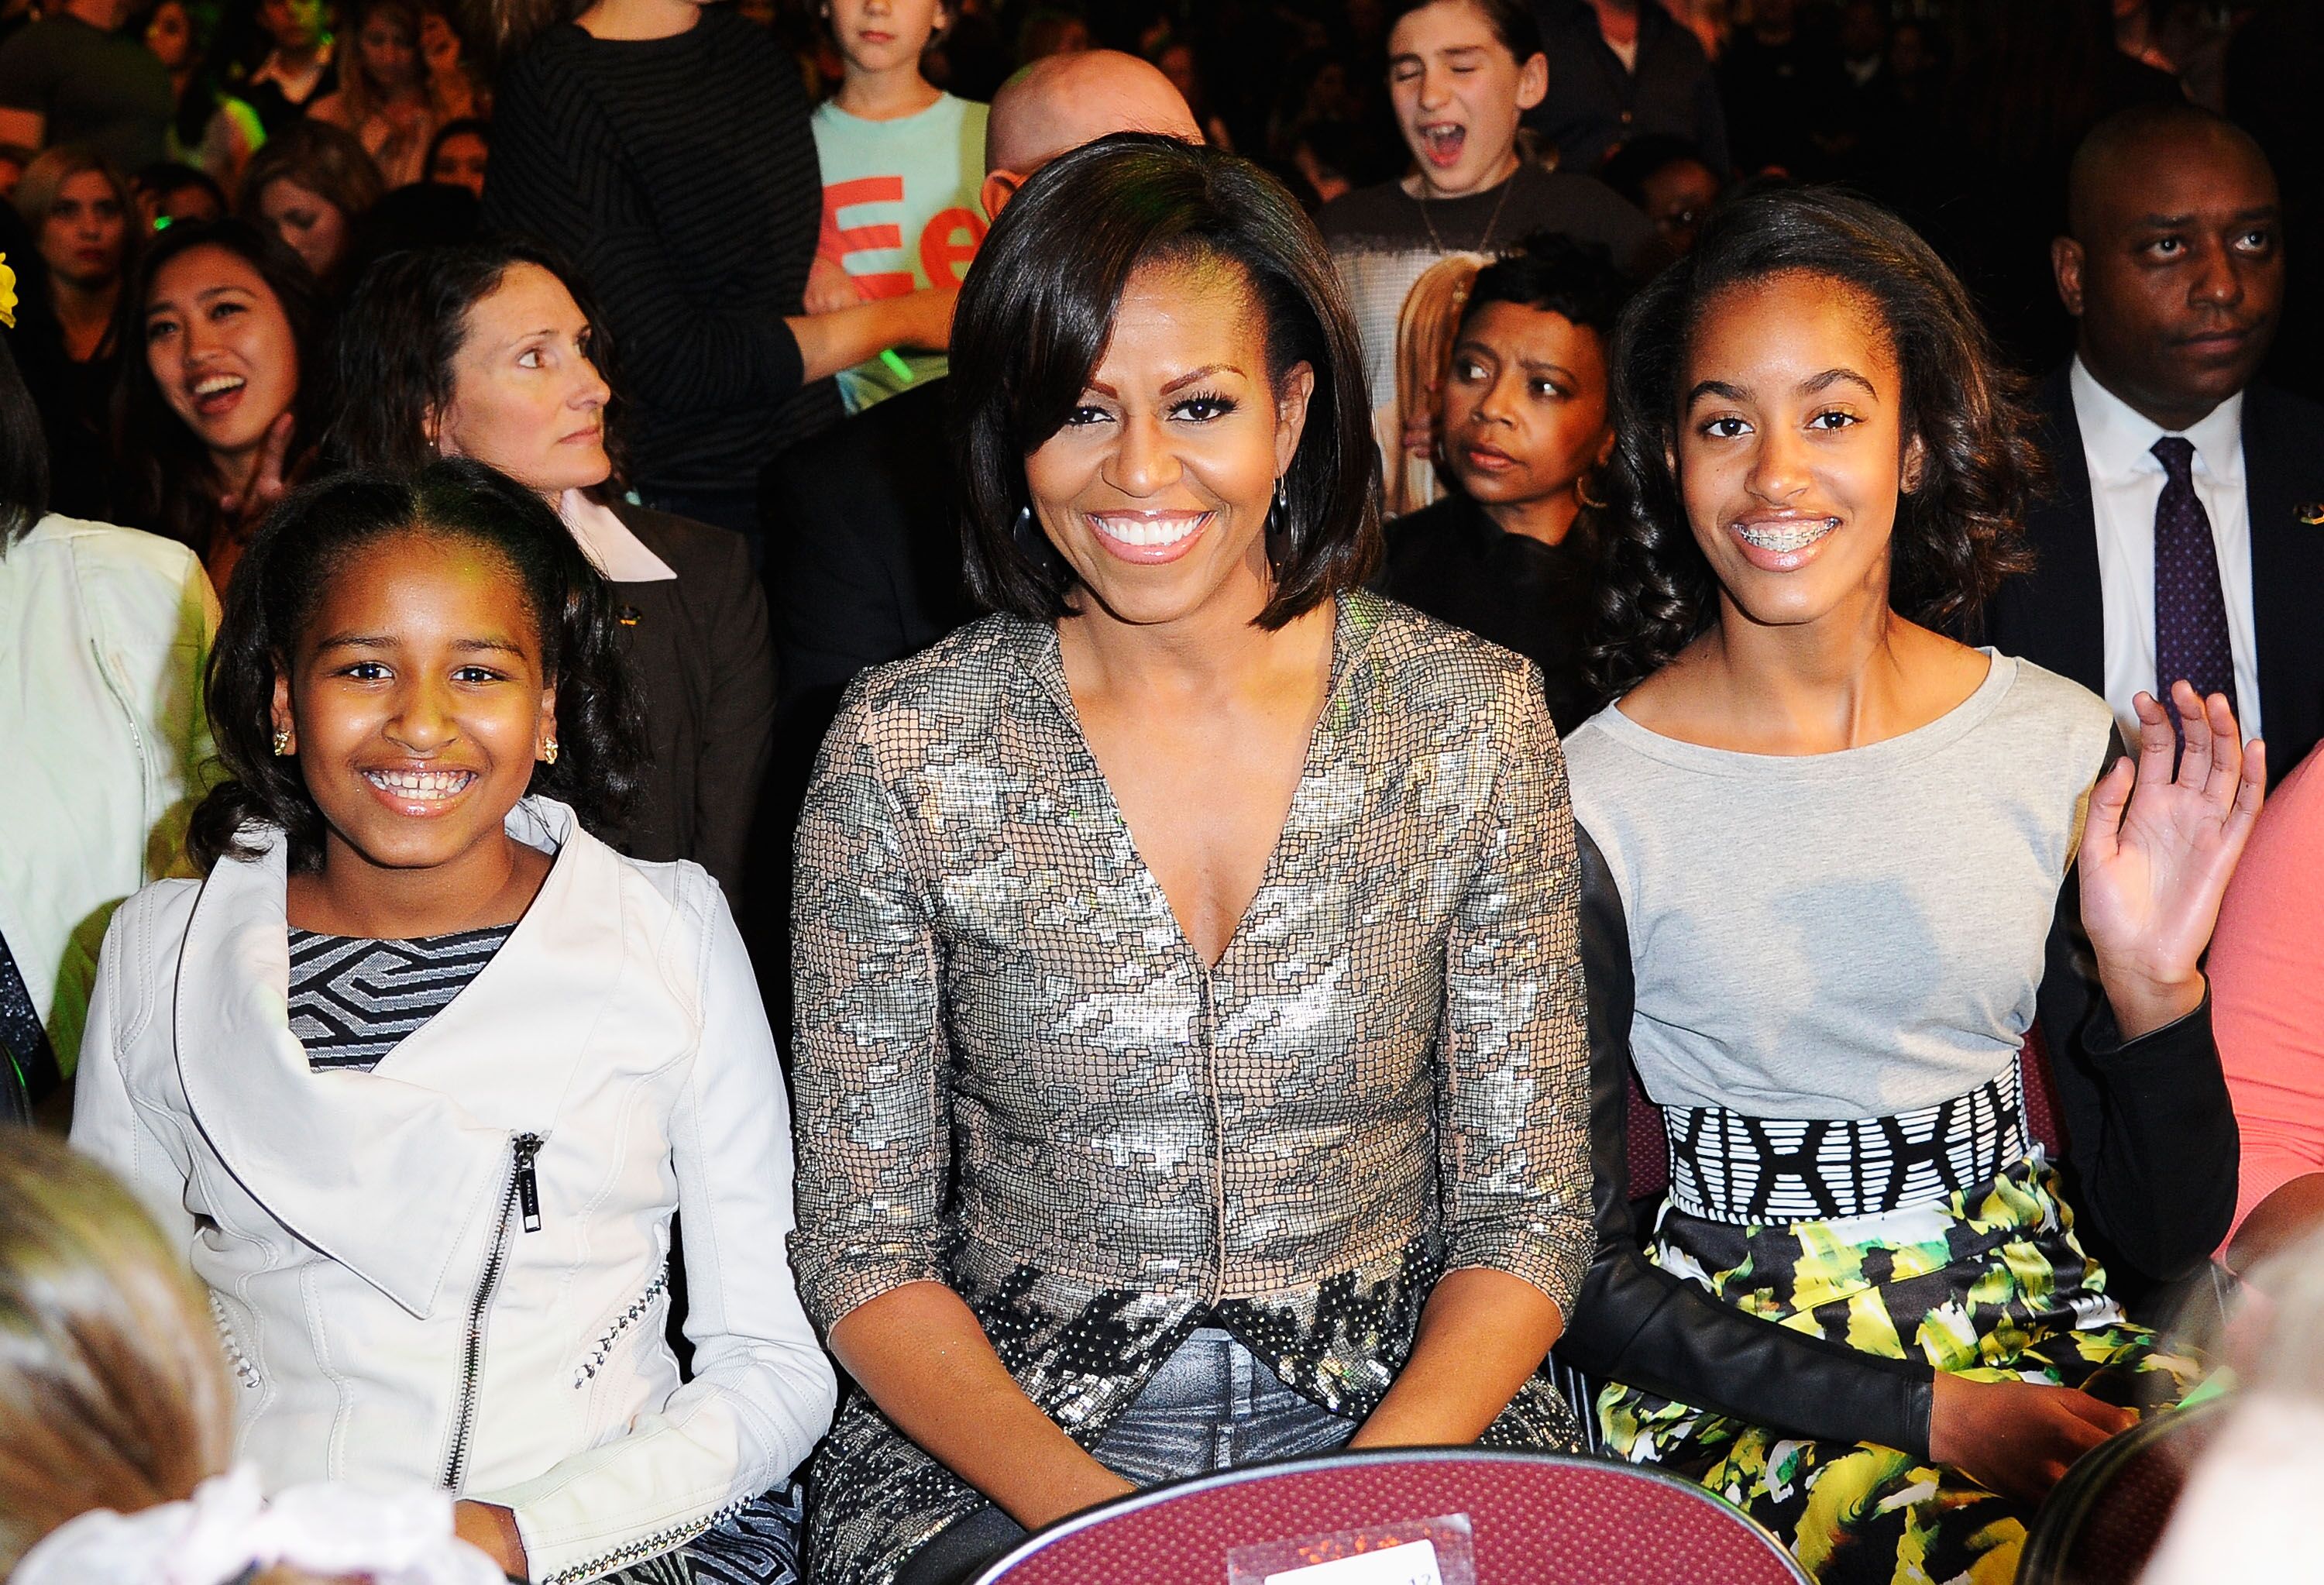 Sasha Obama, First Lady Michelle Obama and Malia Obama at Nickelodeon's 25th Annual Kids' Choice Awards | Getty Images